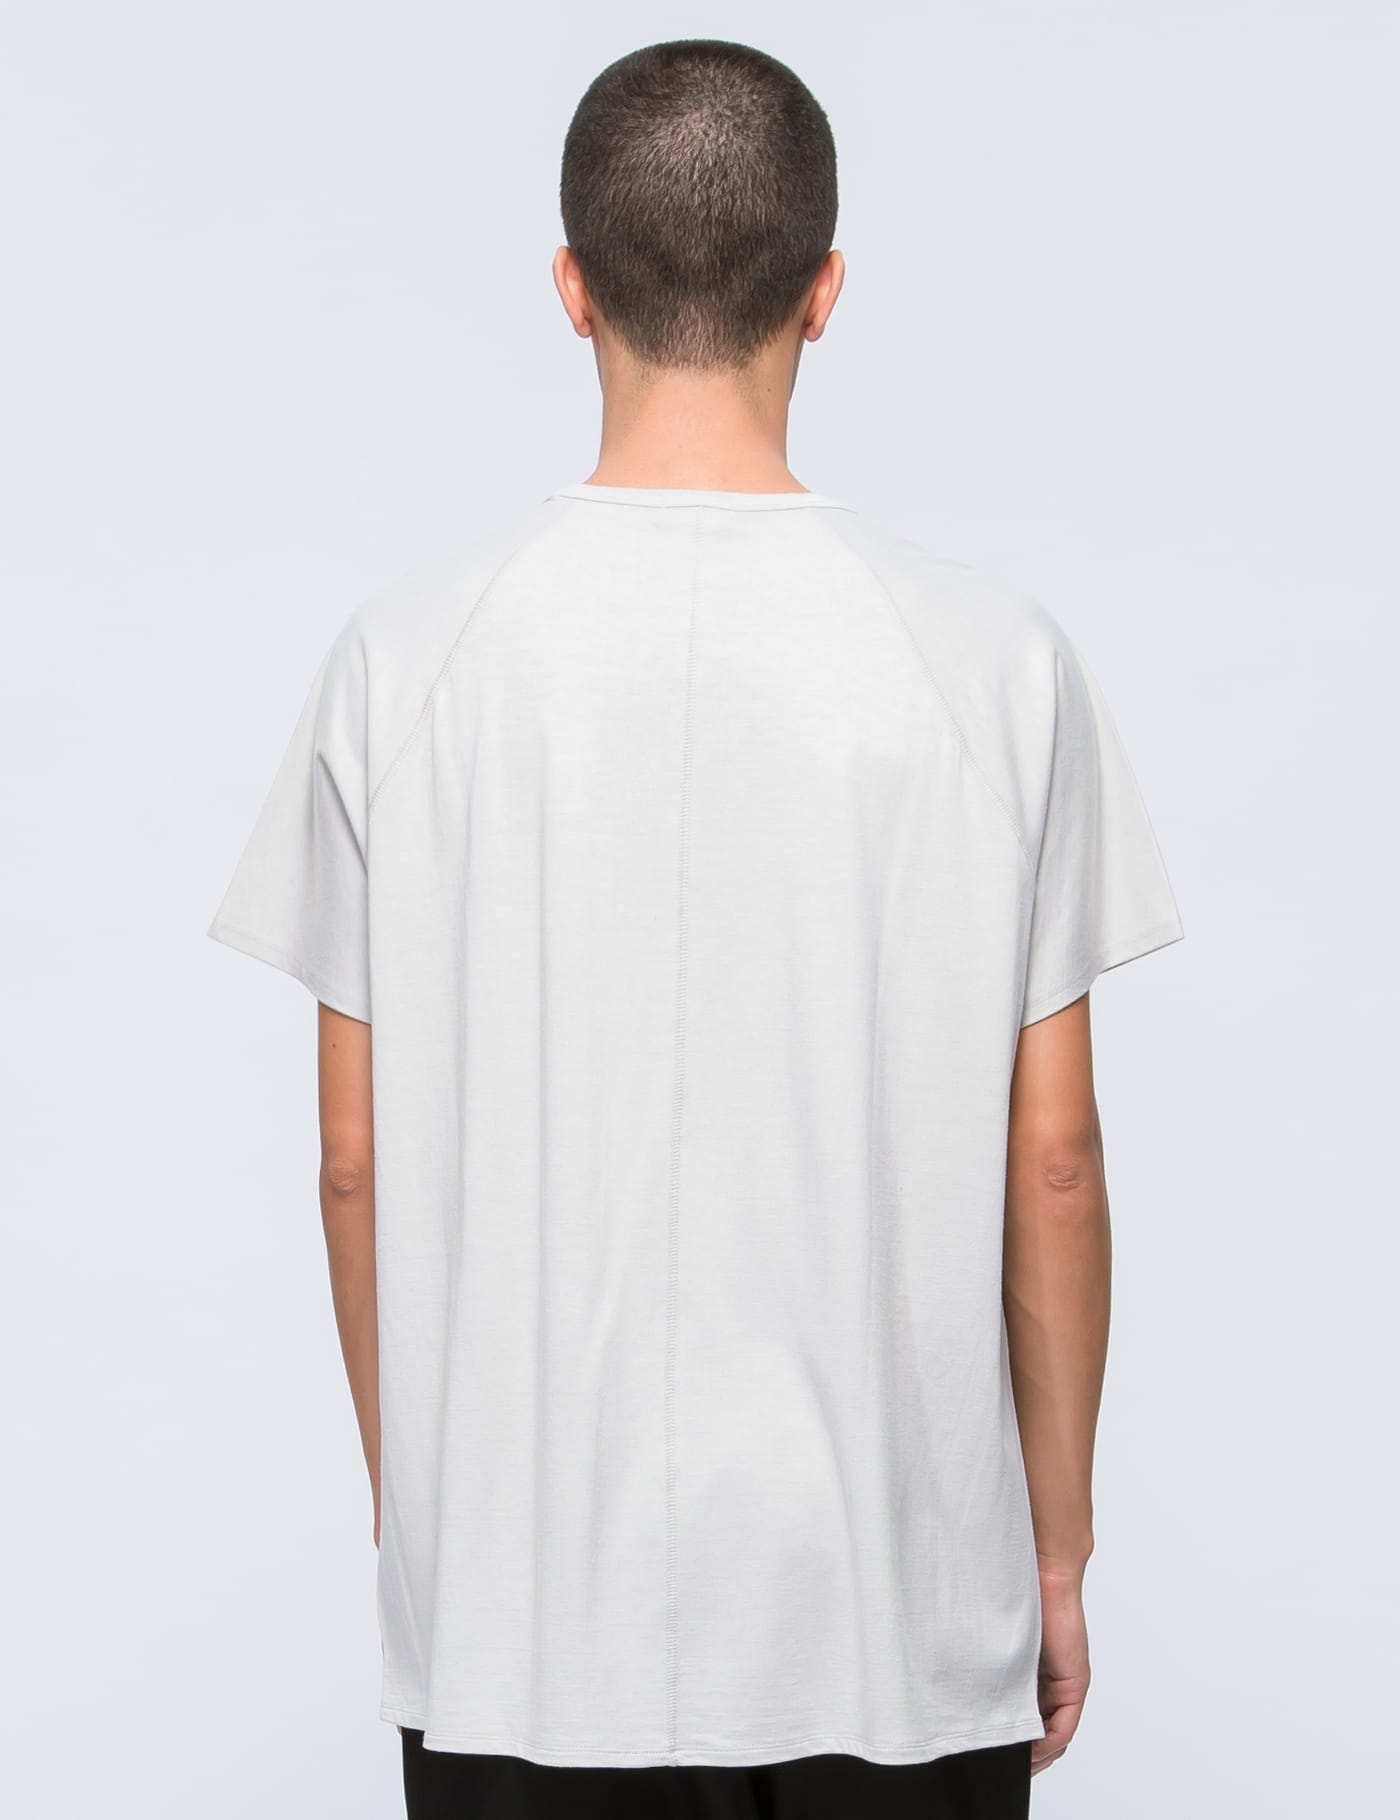 LAD MUSICIAN - Regular S/S T-Shirt | HBX - Globally Curated